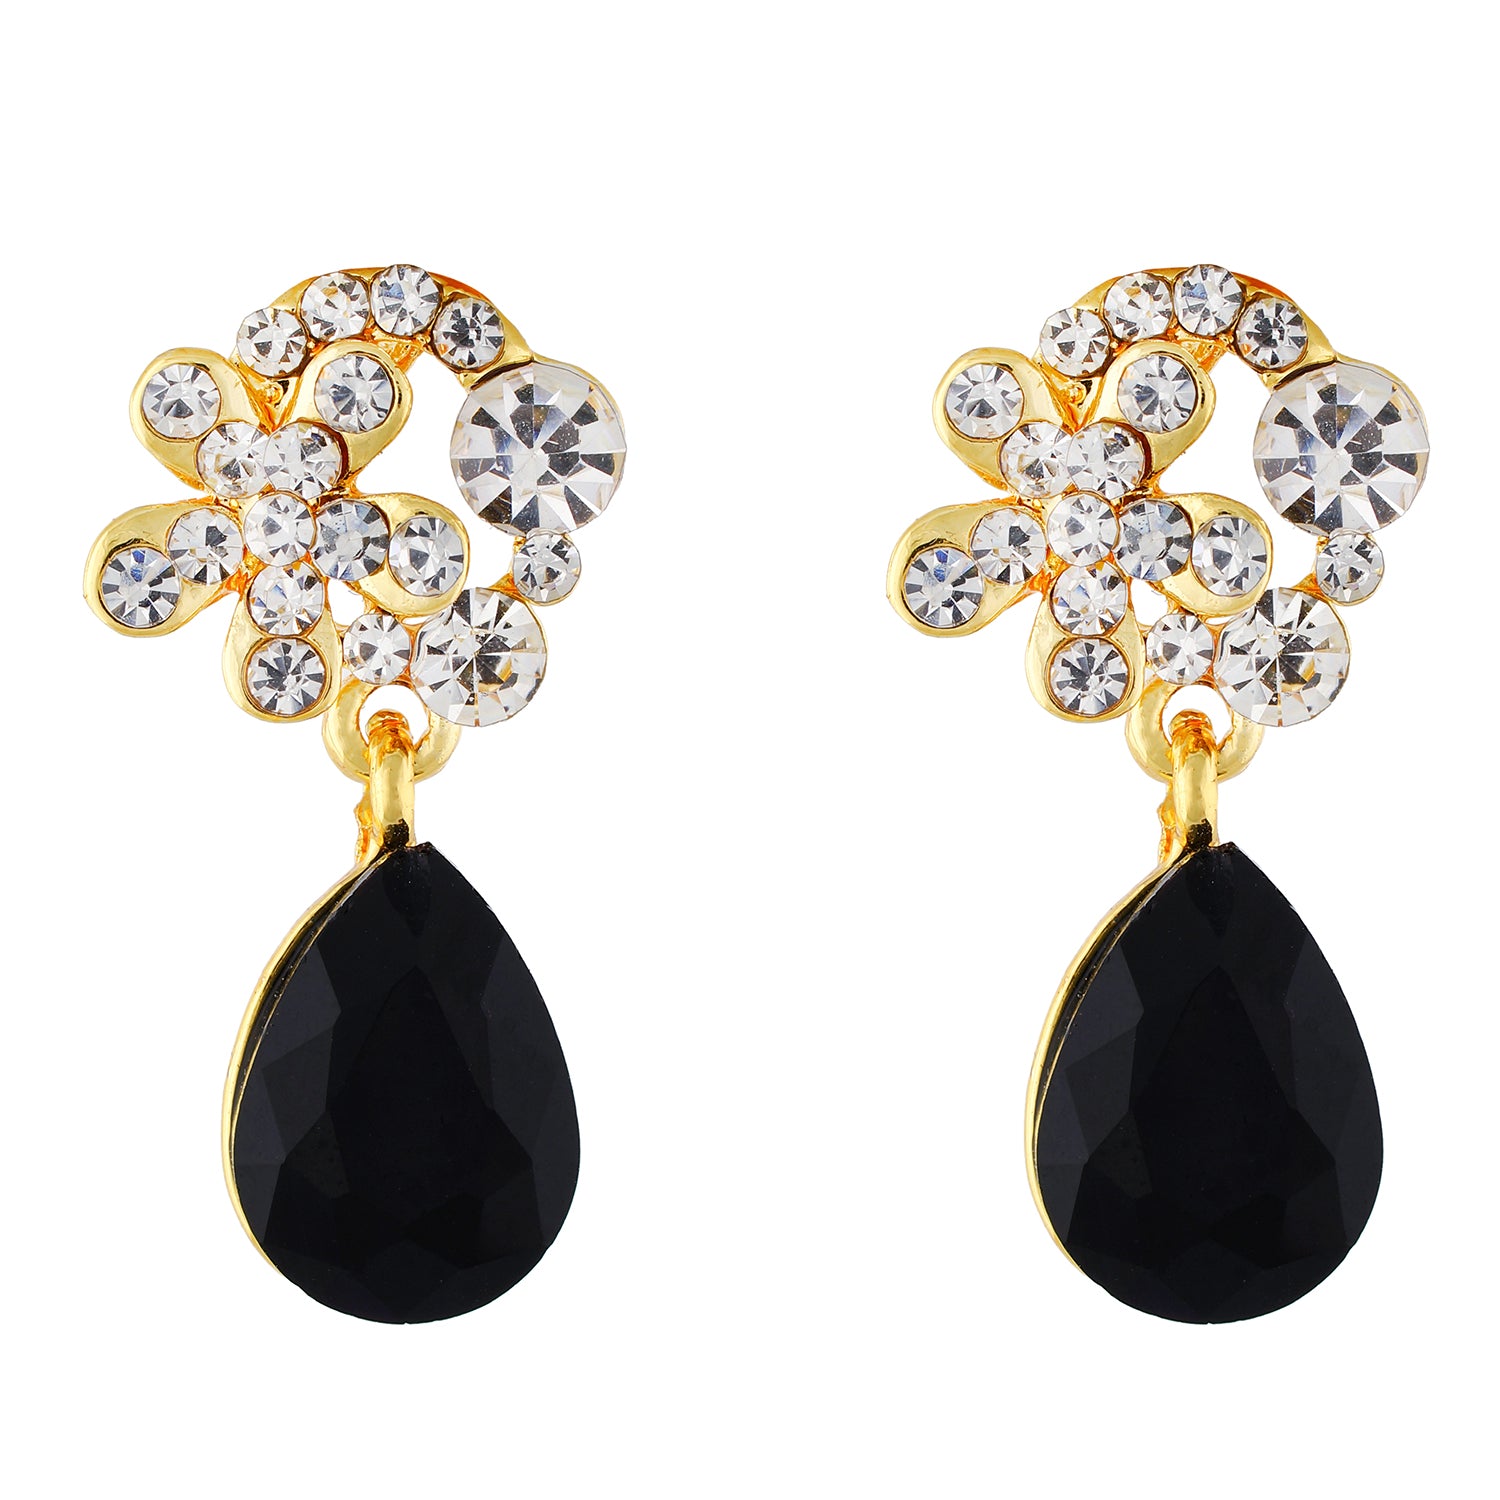 Exclusive Gold Colour Floral Design Earring with Black Drop for Girls and Women